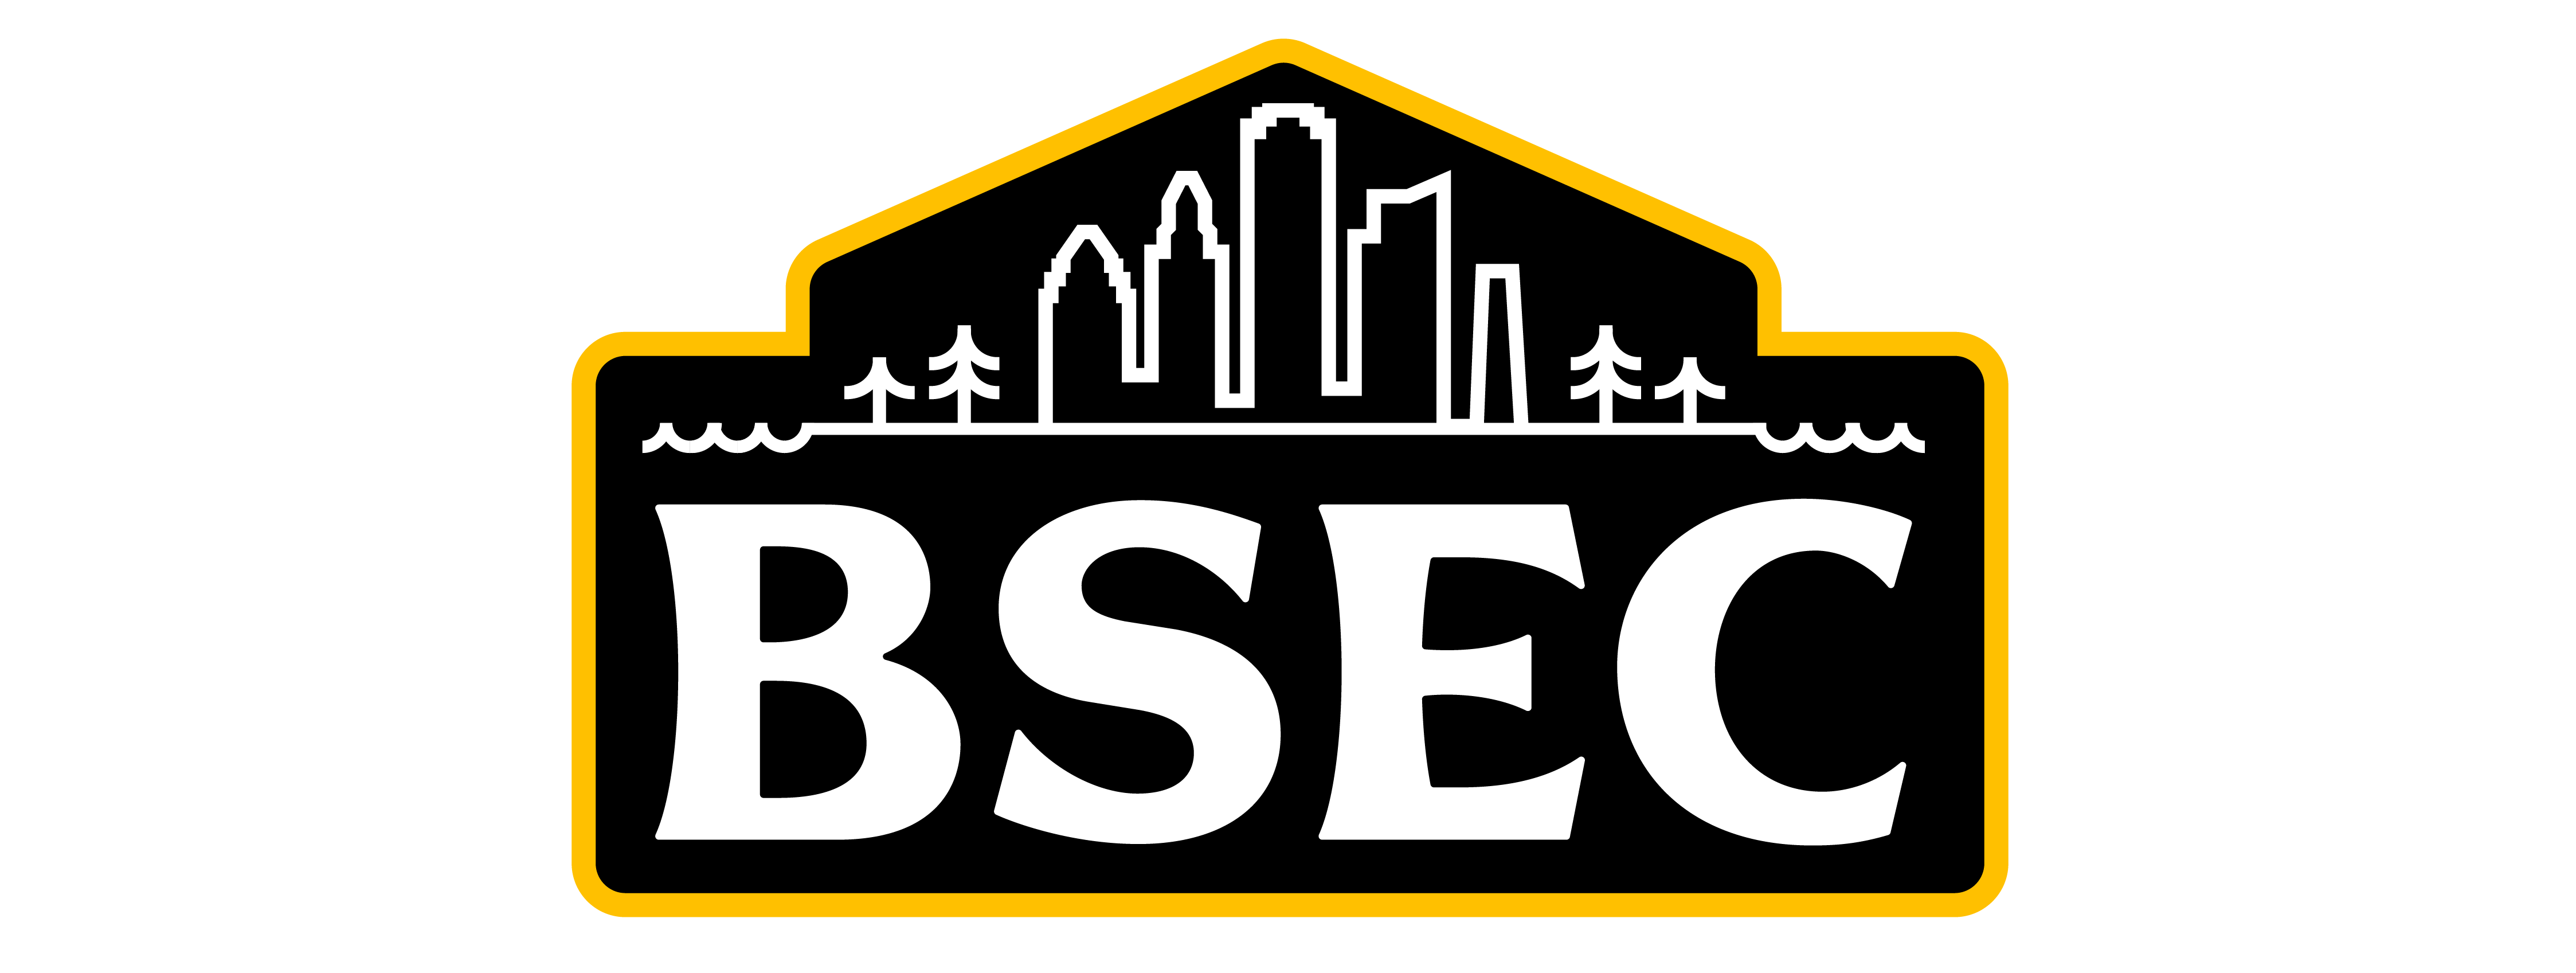 BSEC logo, black with white lettering and a gold outline